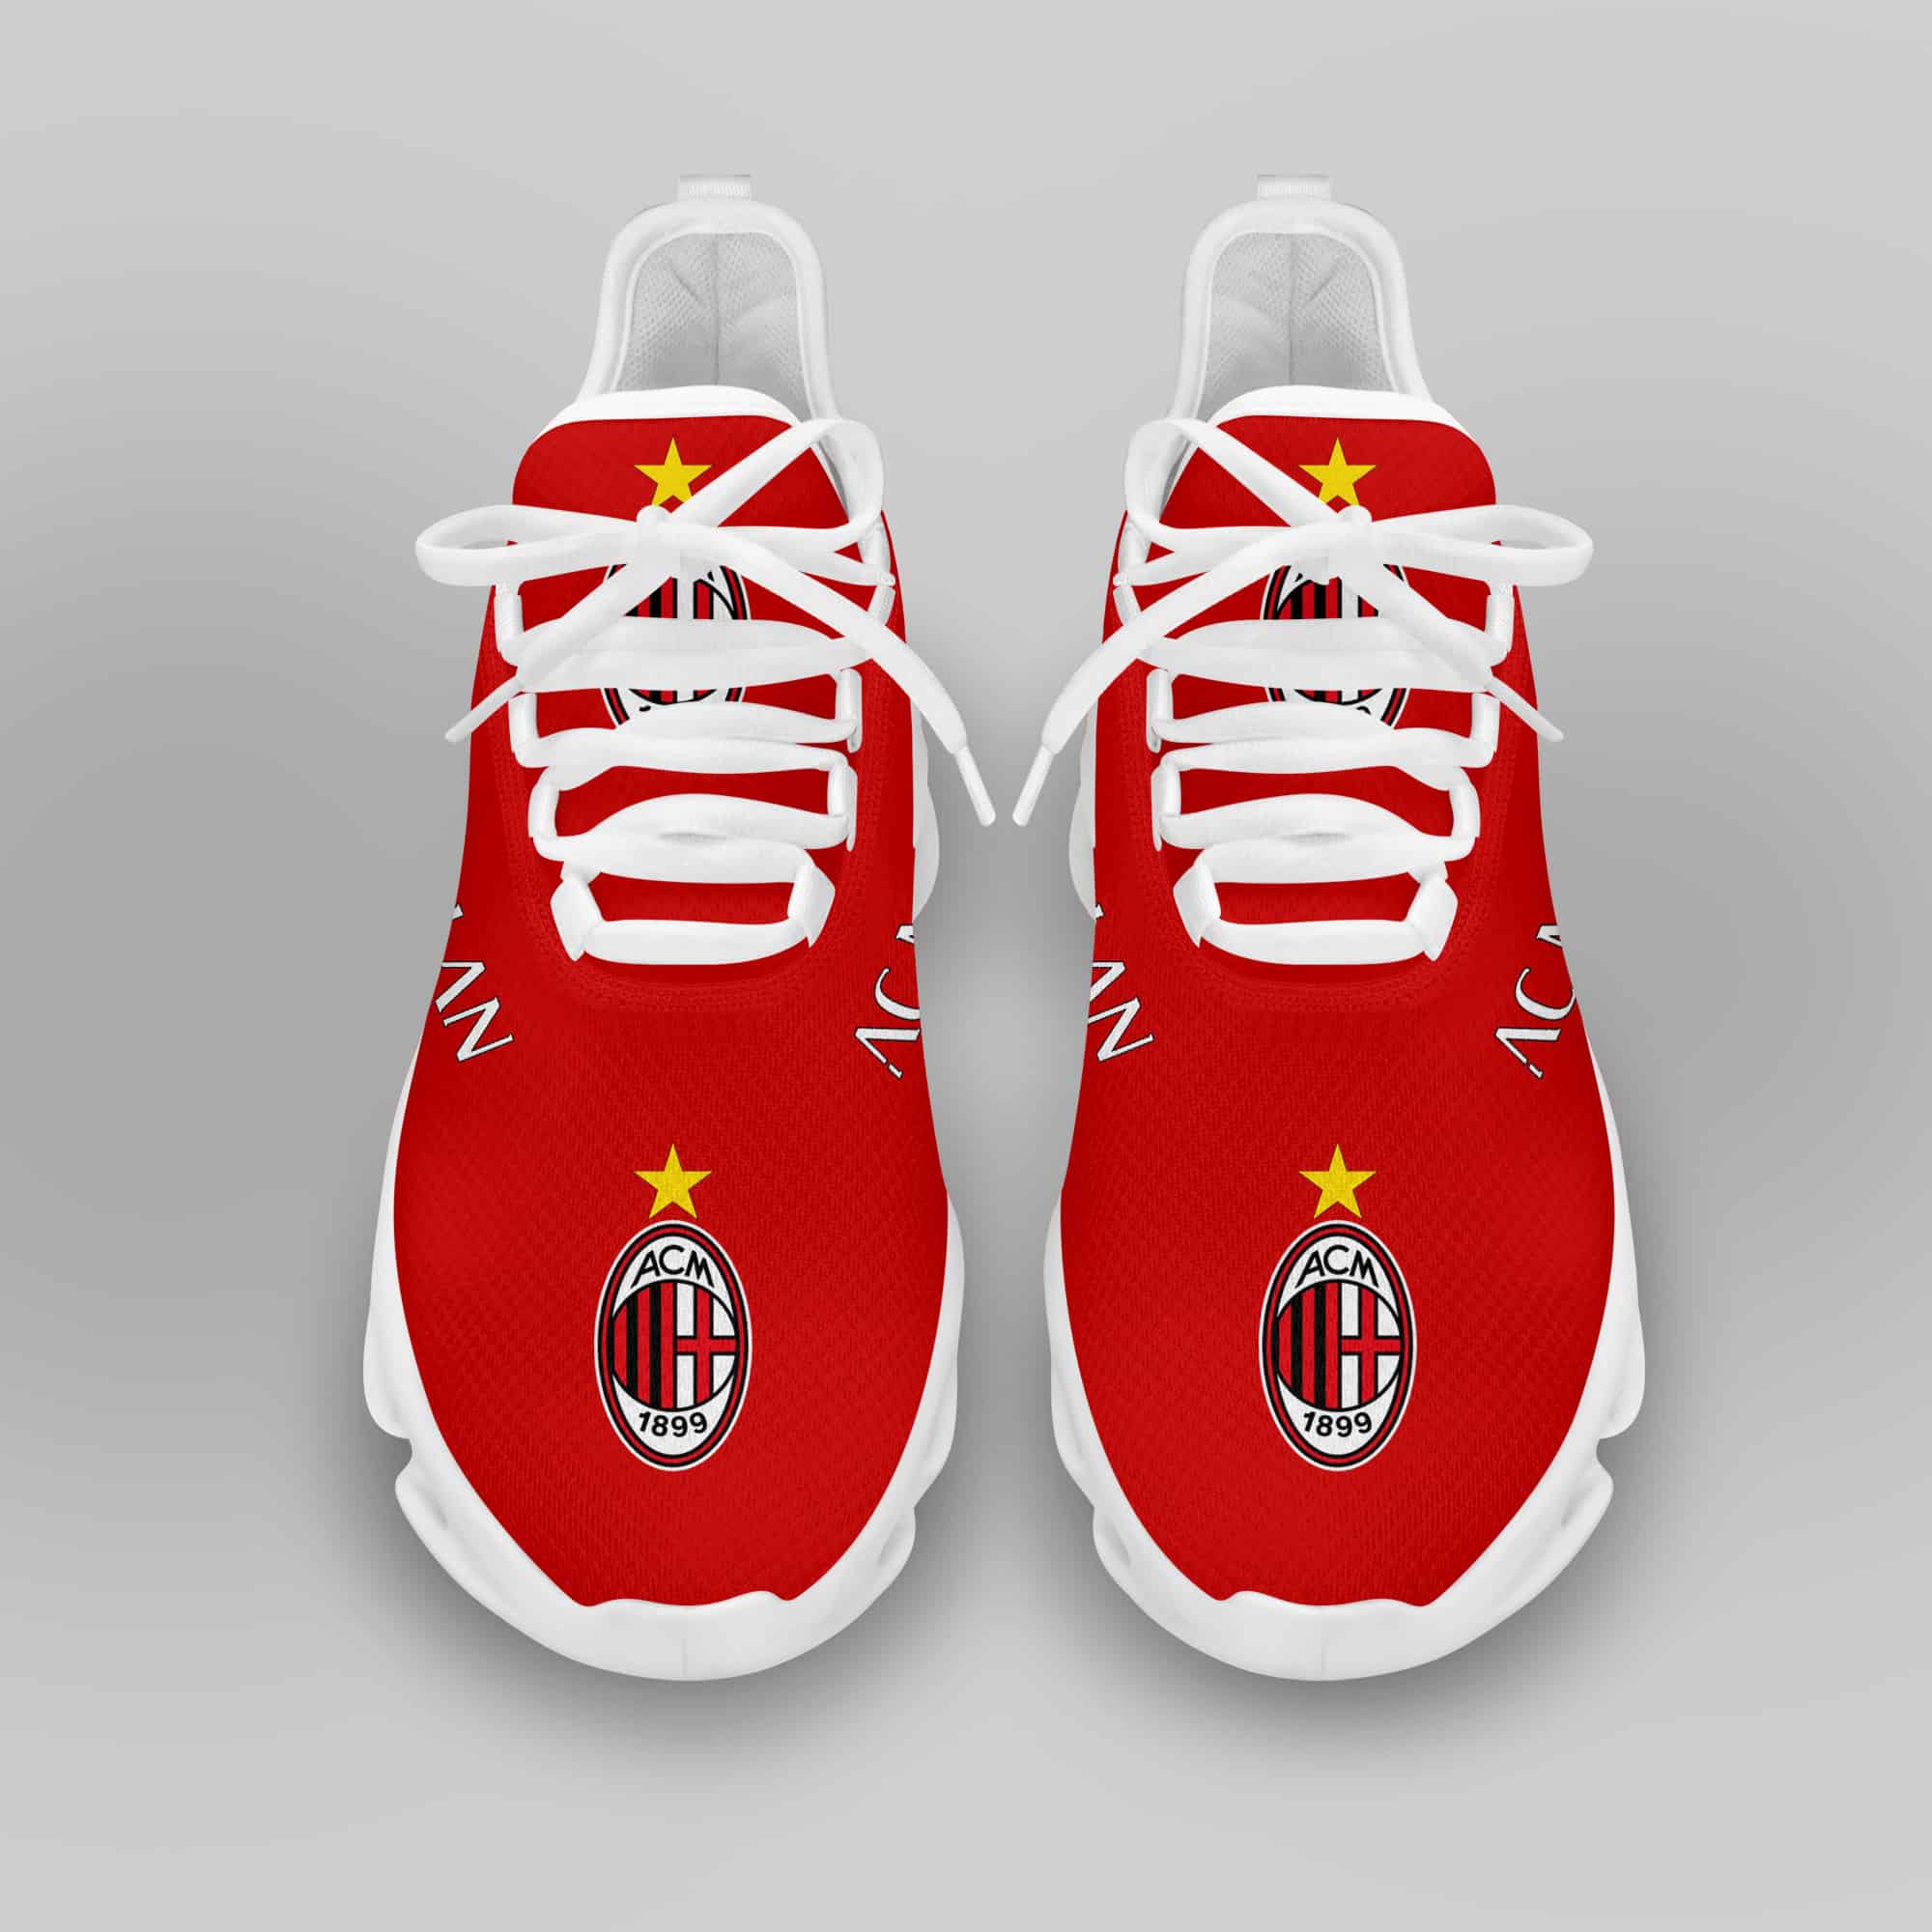 Ac Milan Running Shoes Max Soul Shoes Sneakers Ver 7 3